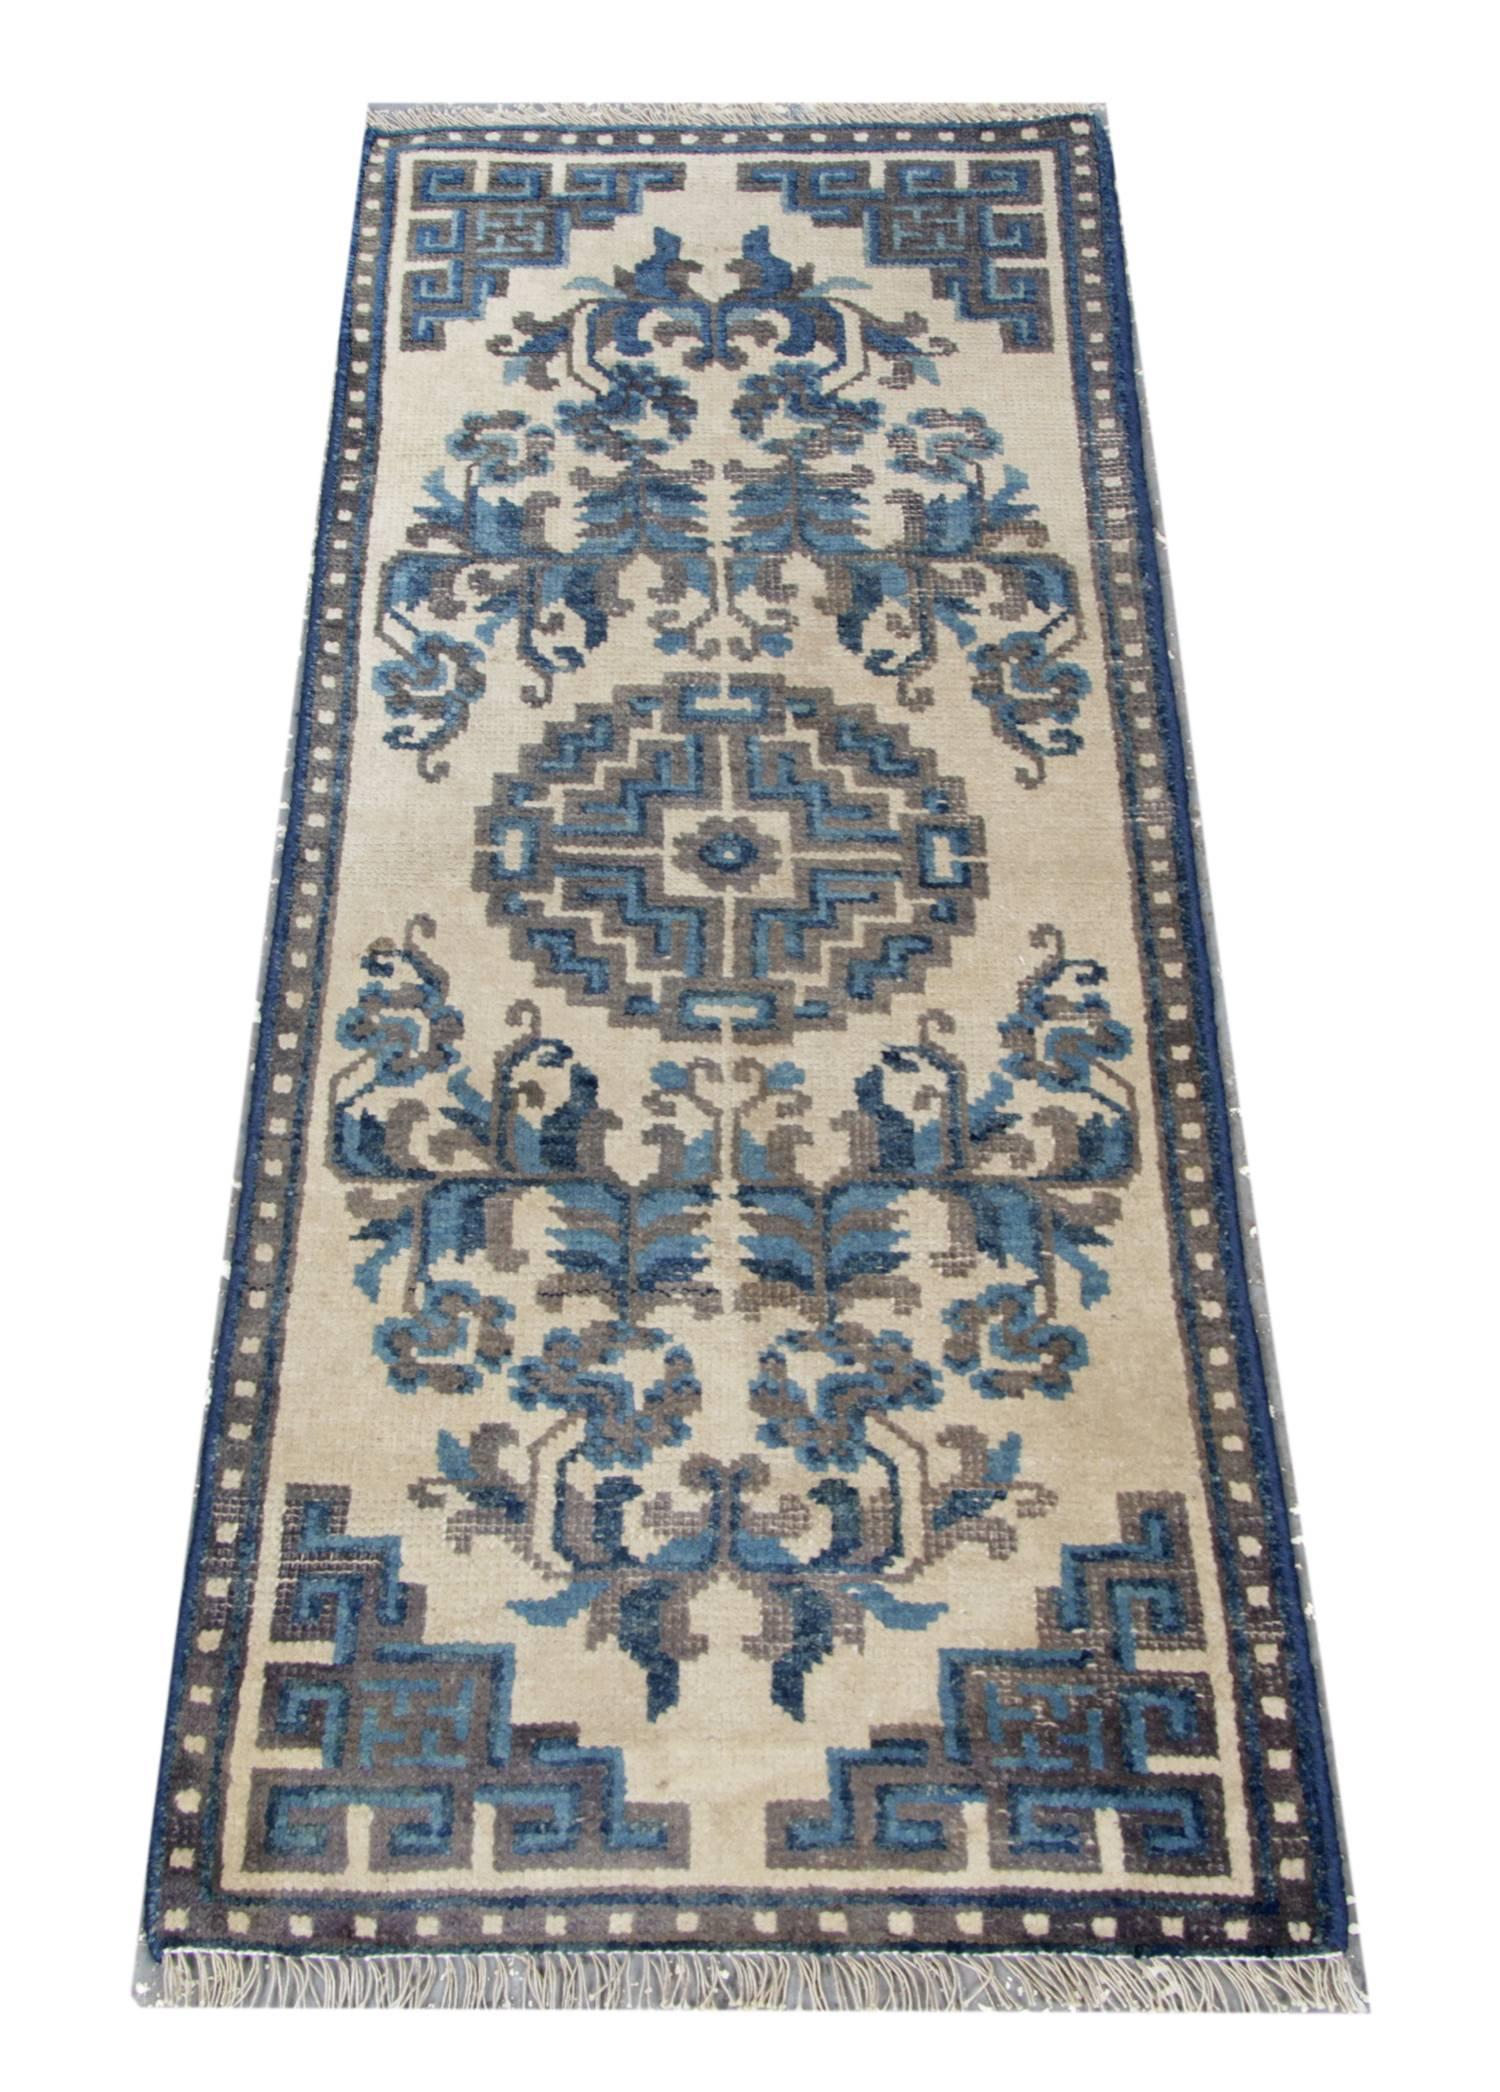 Antique Rugs handmade carpet Chinese rugs with a great colour combination. Blue and white rugs and runners for sale are the unique choice of patterned rugs. Most Antique Oriental rugs are one of a kind as they are colourful carpets and rugs. This